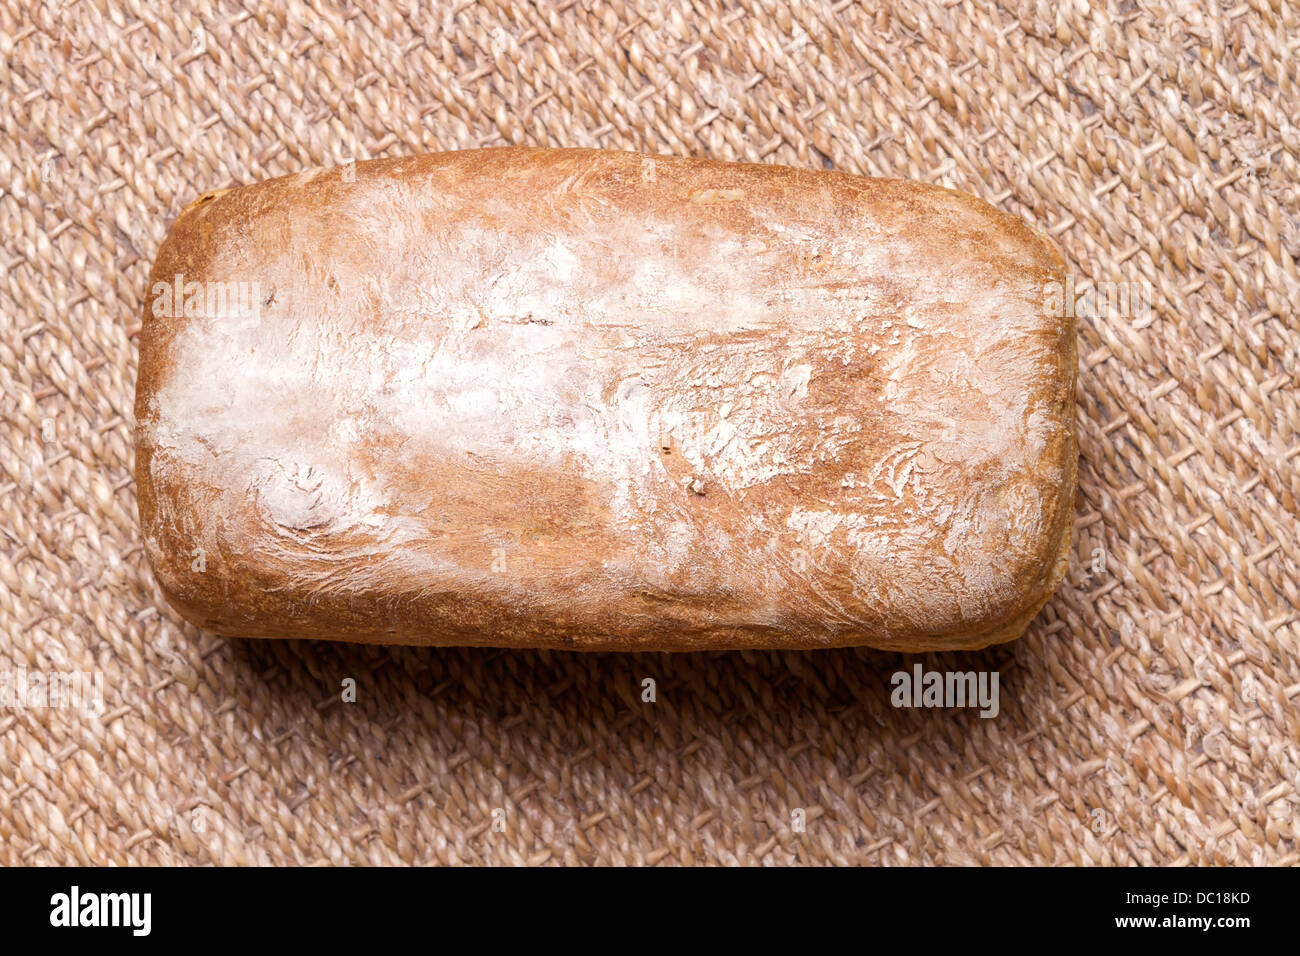 Loaf of home baked bread Stock Photo